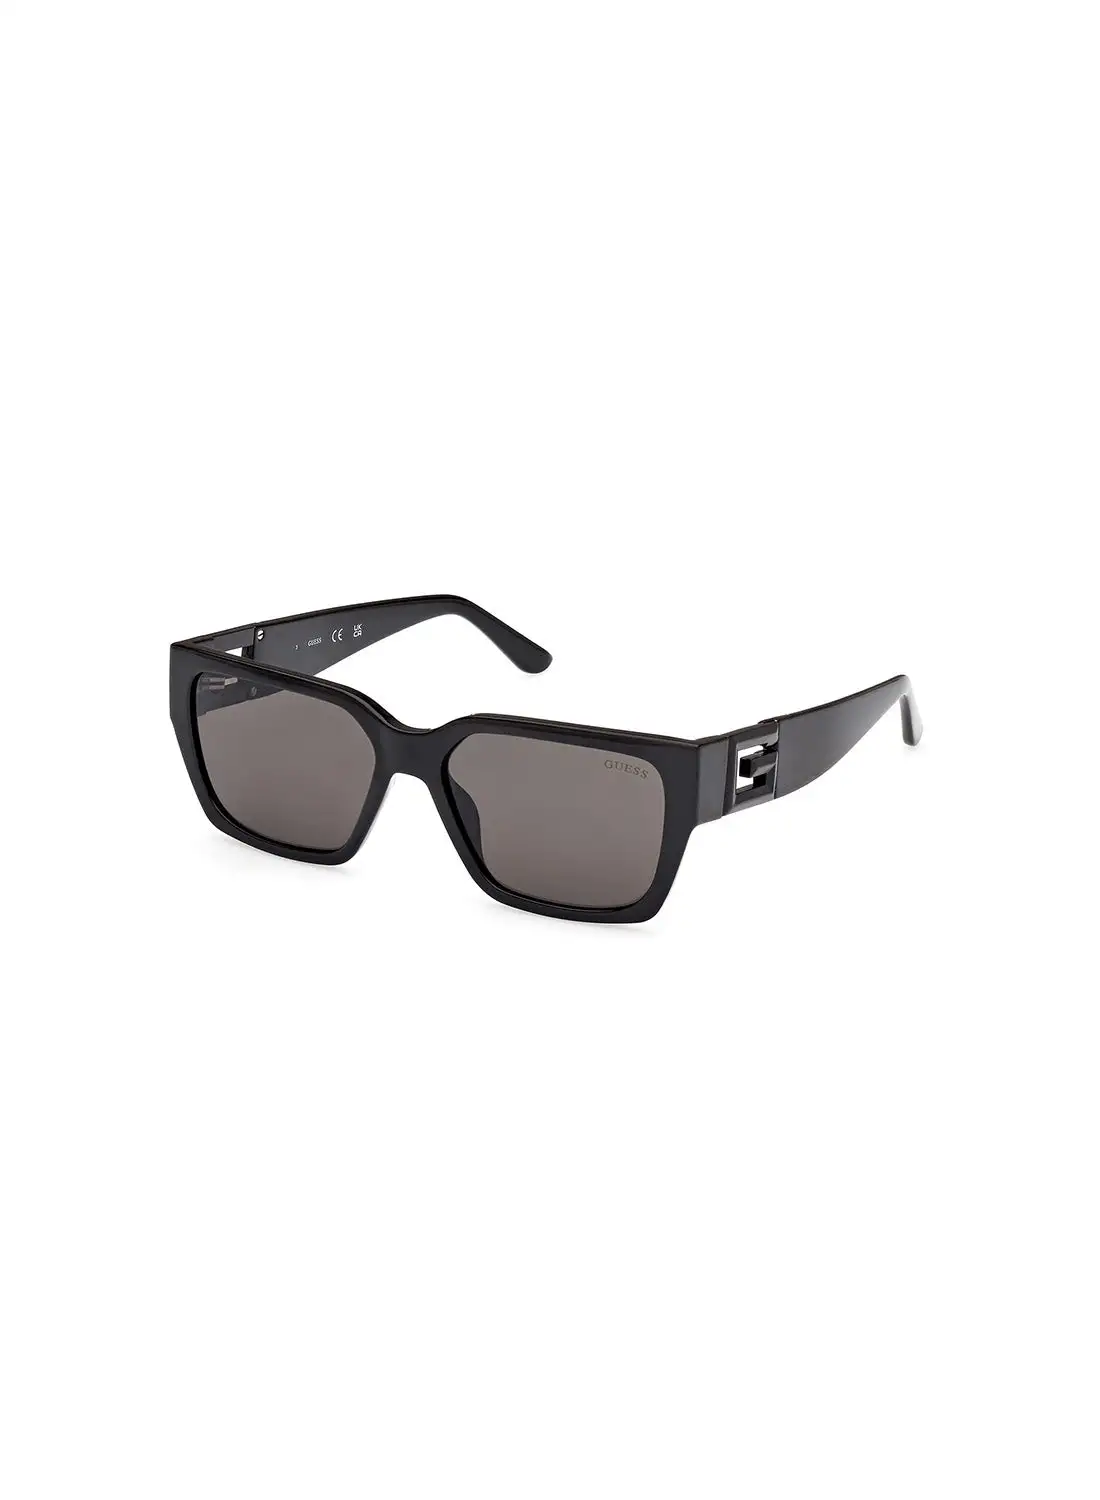 GUESS Unisex UV Protection Square Sunglasses - GU791601A55 - Lens Size: 55 Mm